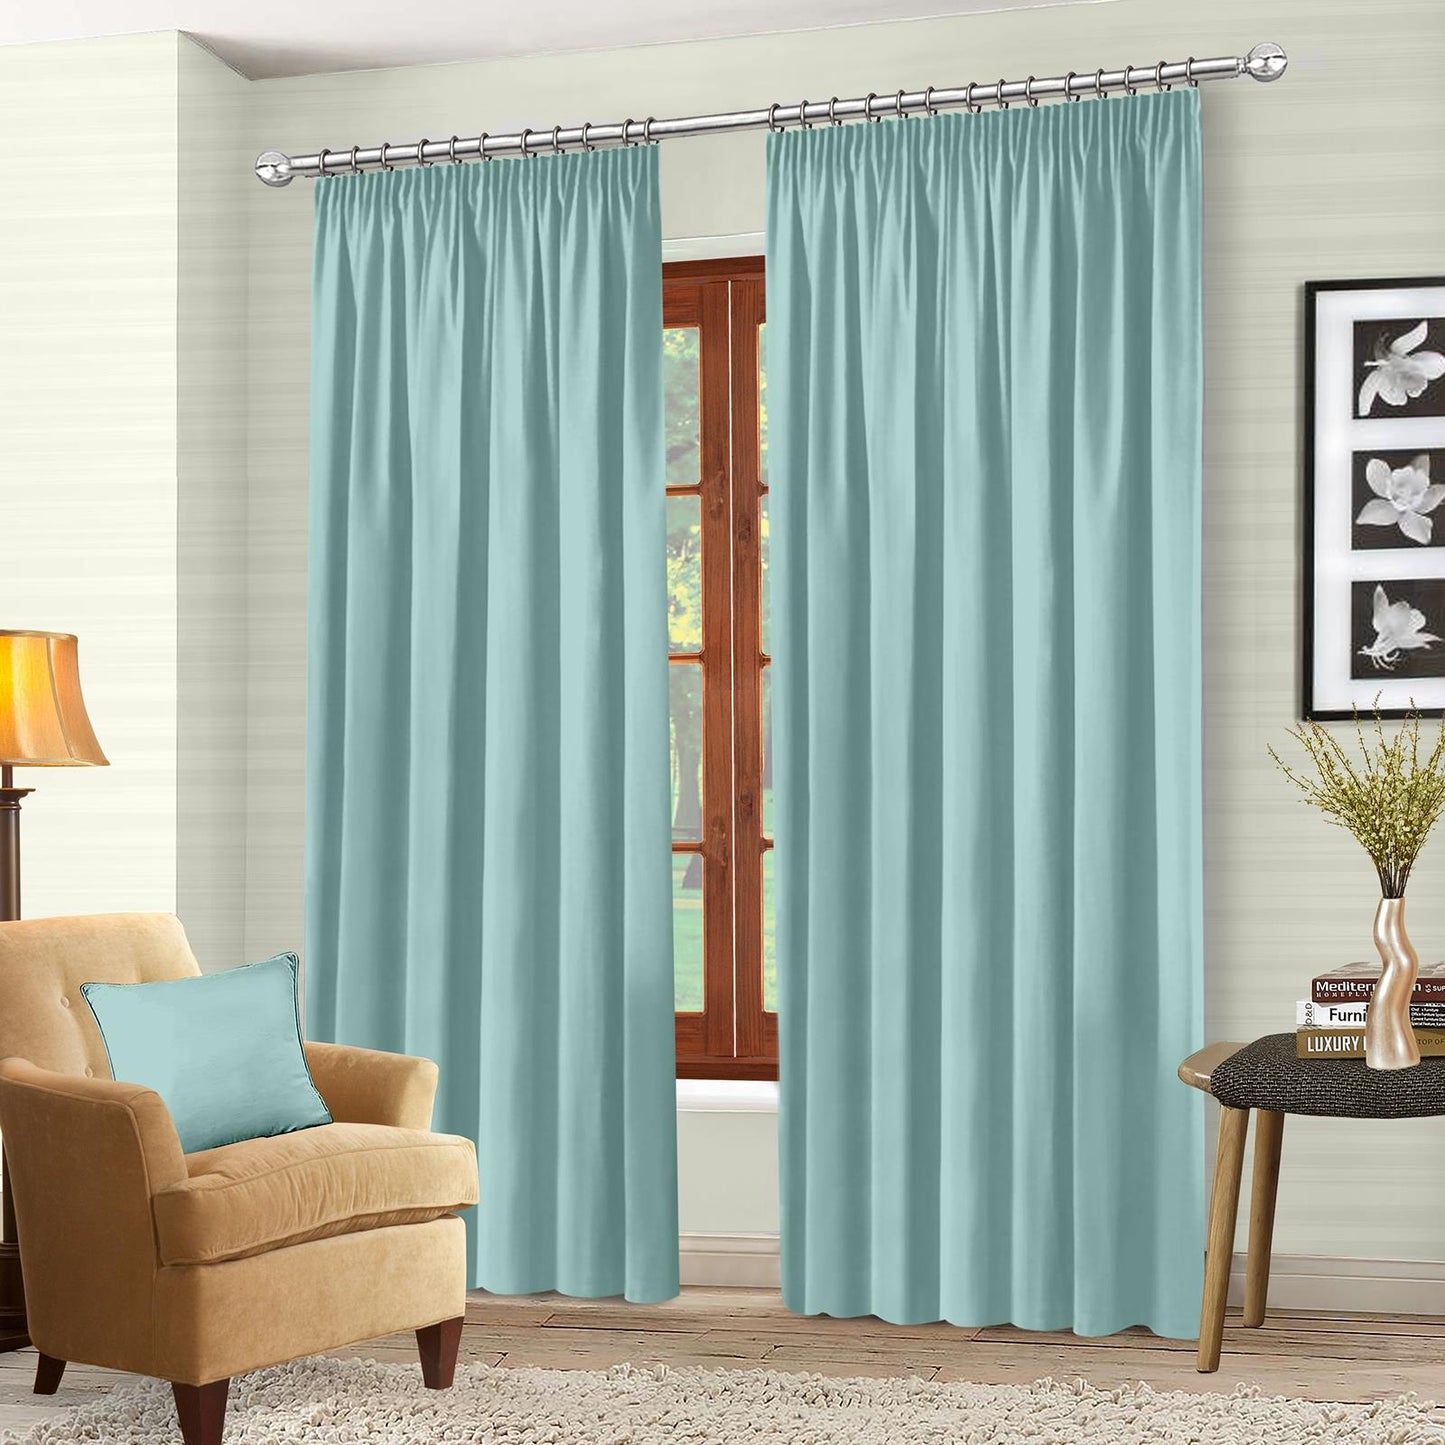 Sleep Better with Pencil Pleated Blackout Curtains